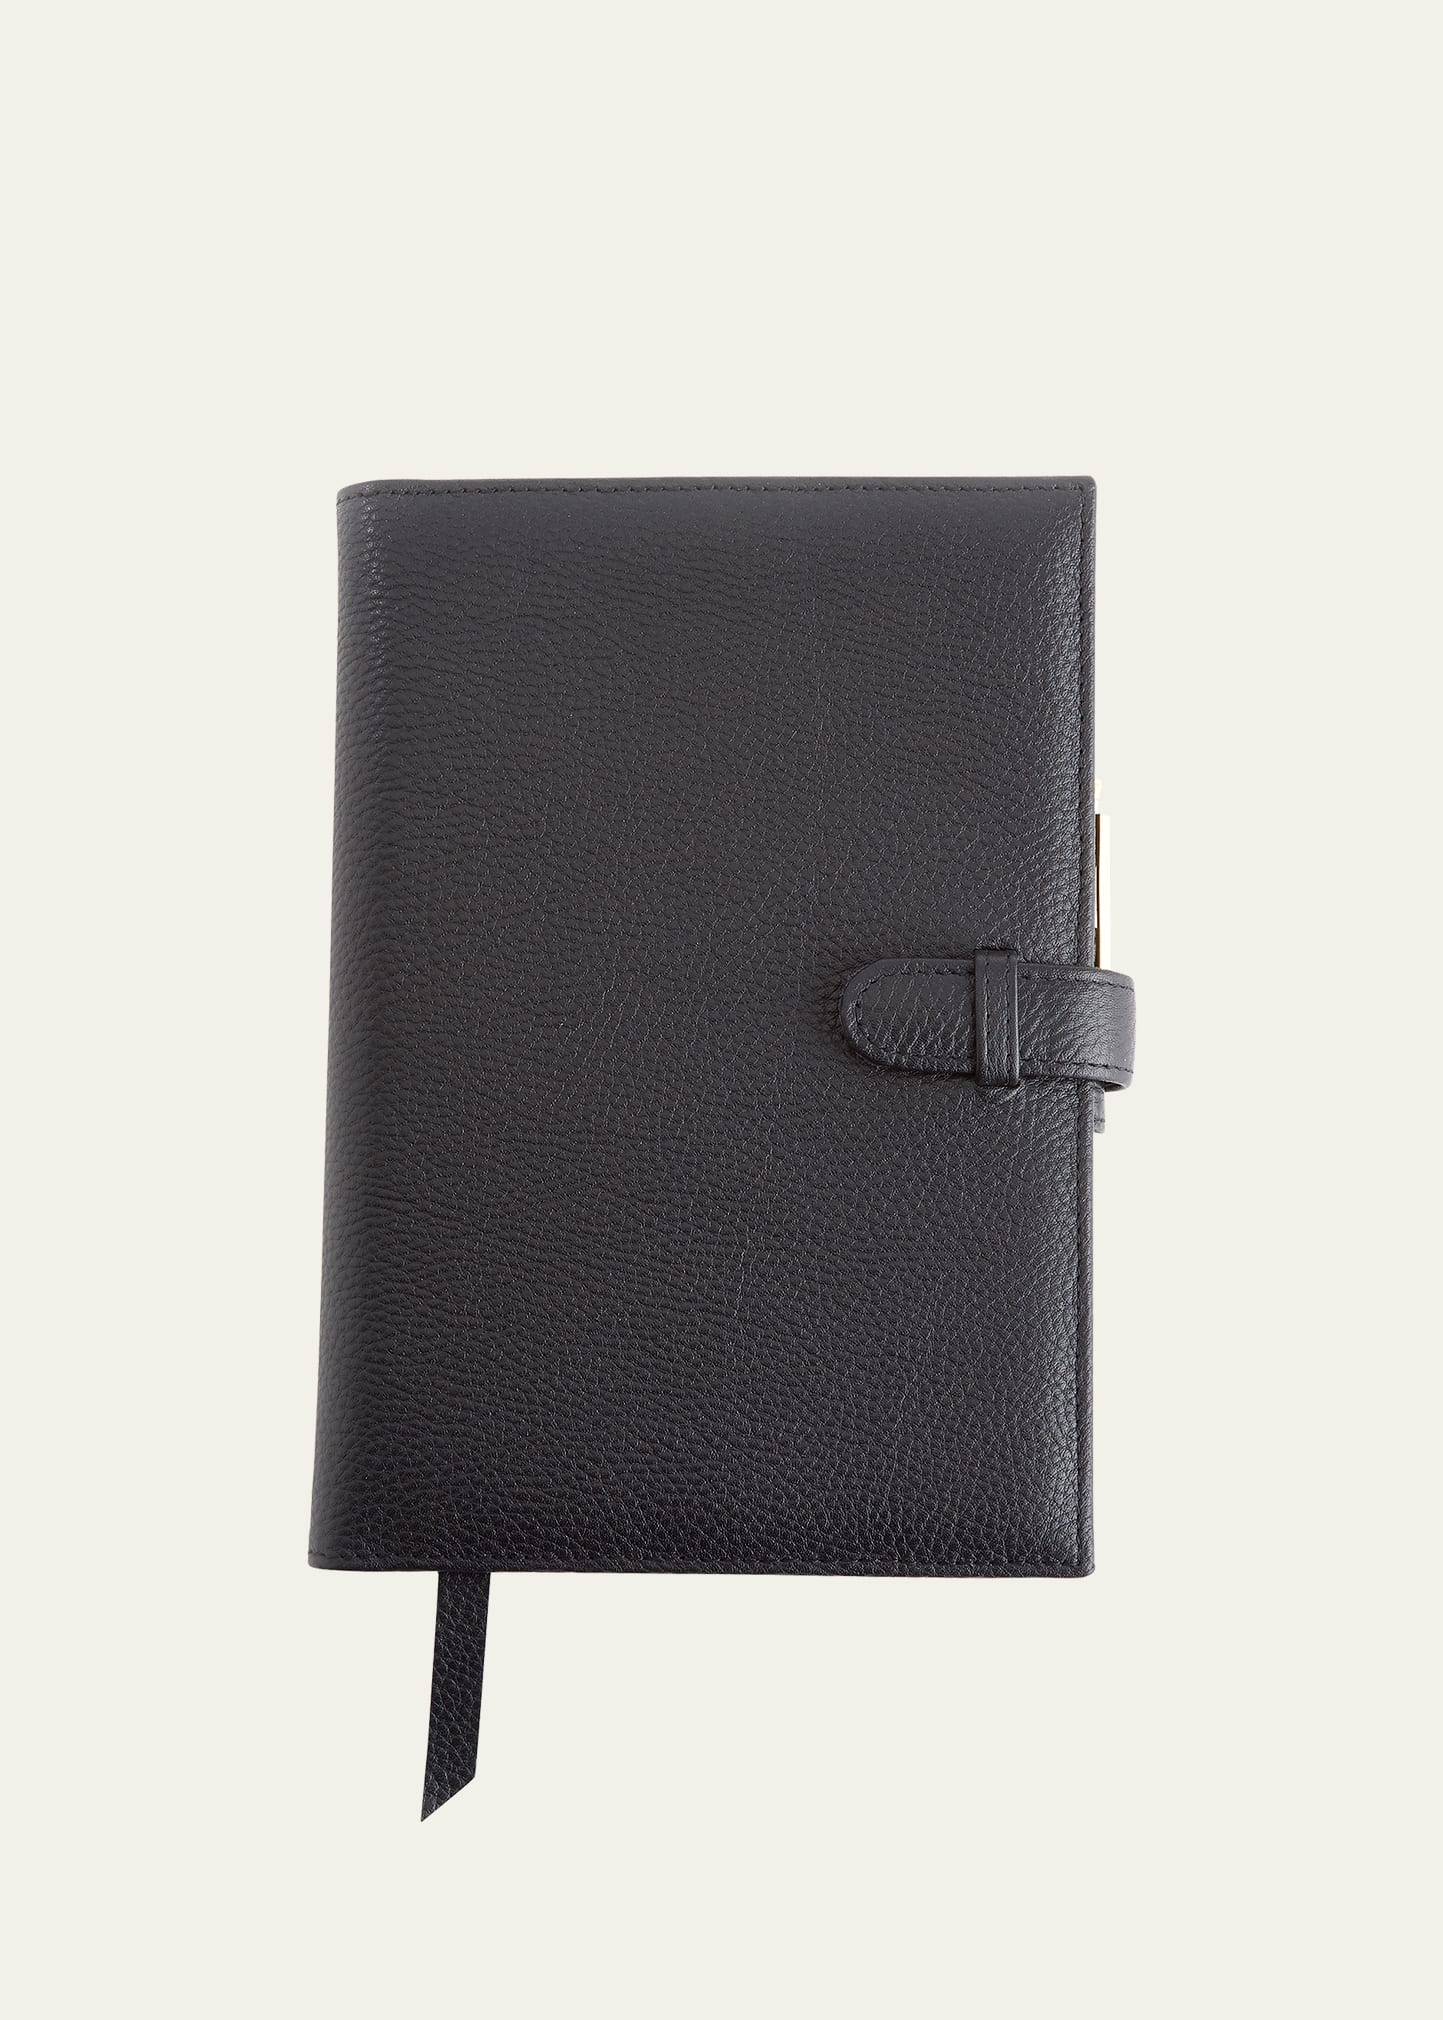 Royce New York Personalized Executive Leather Daily Planner In Black